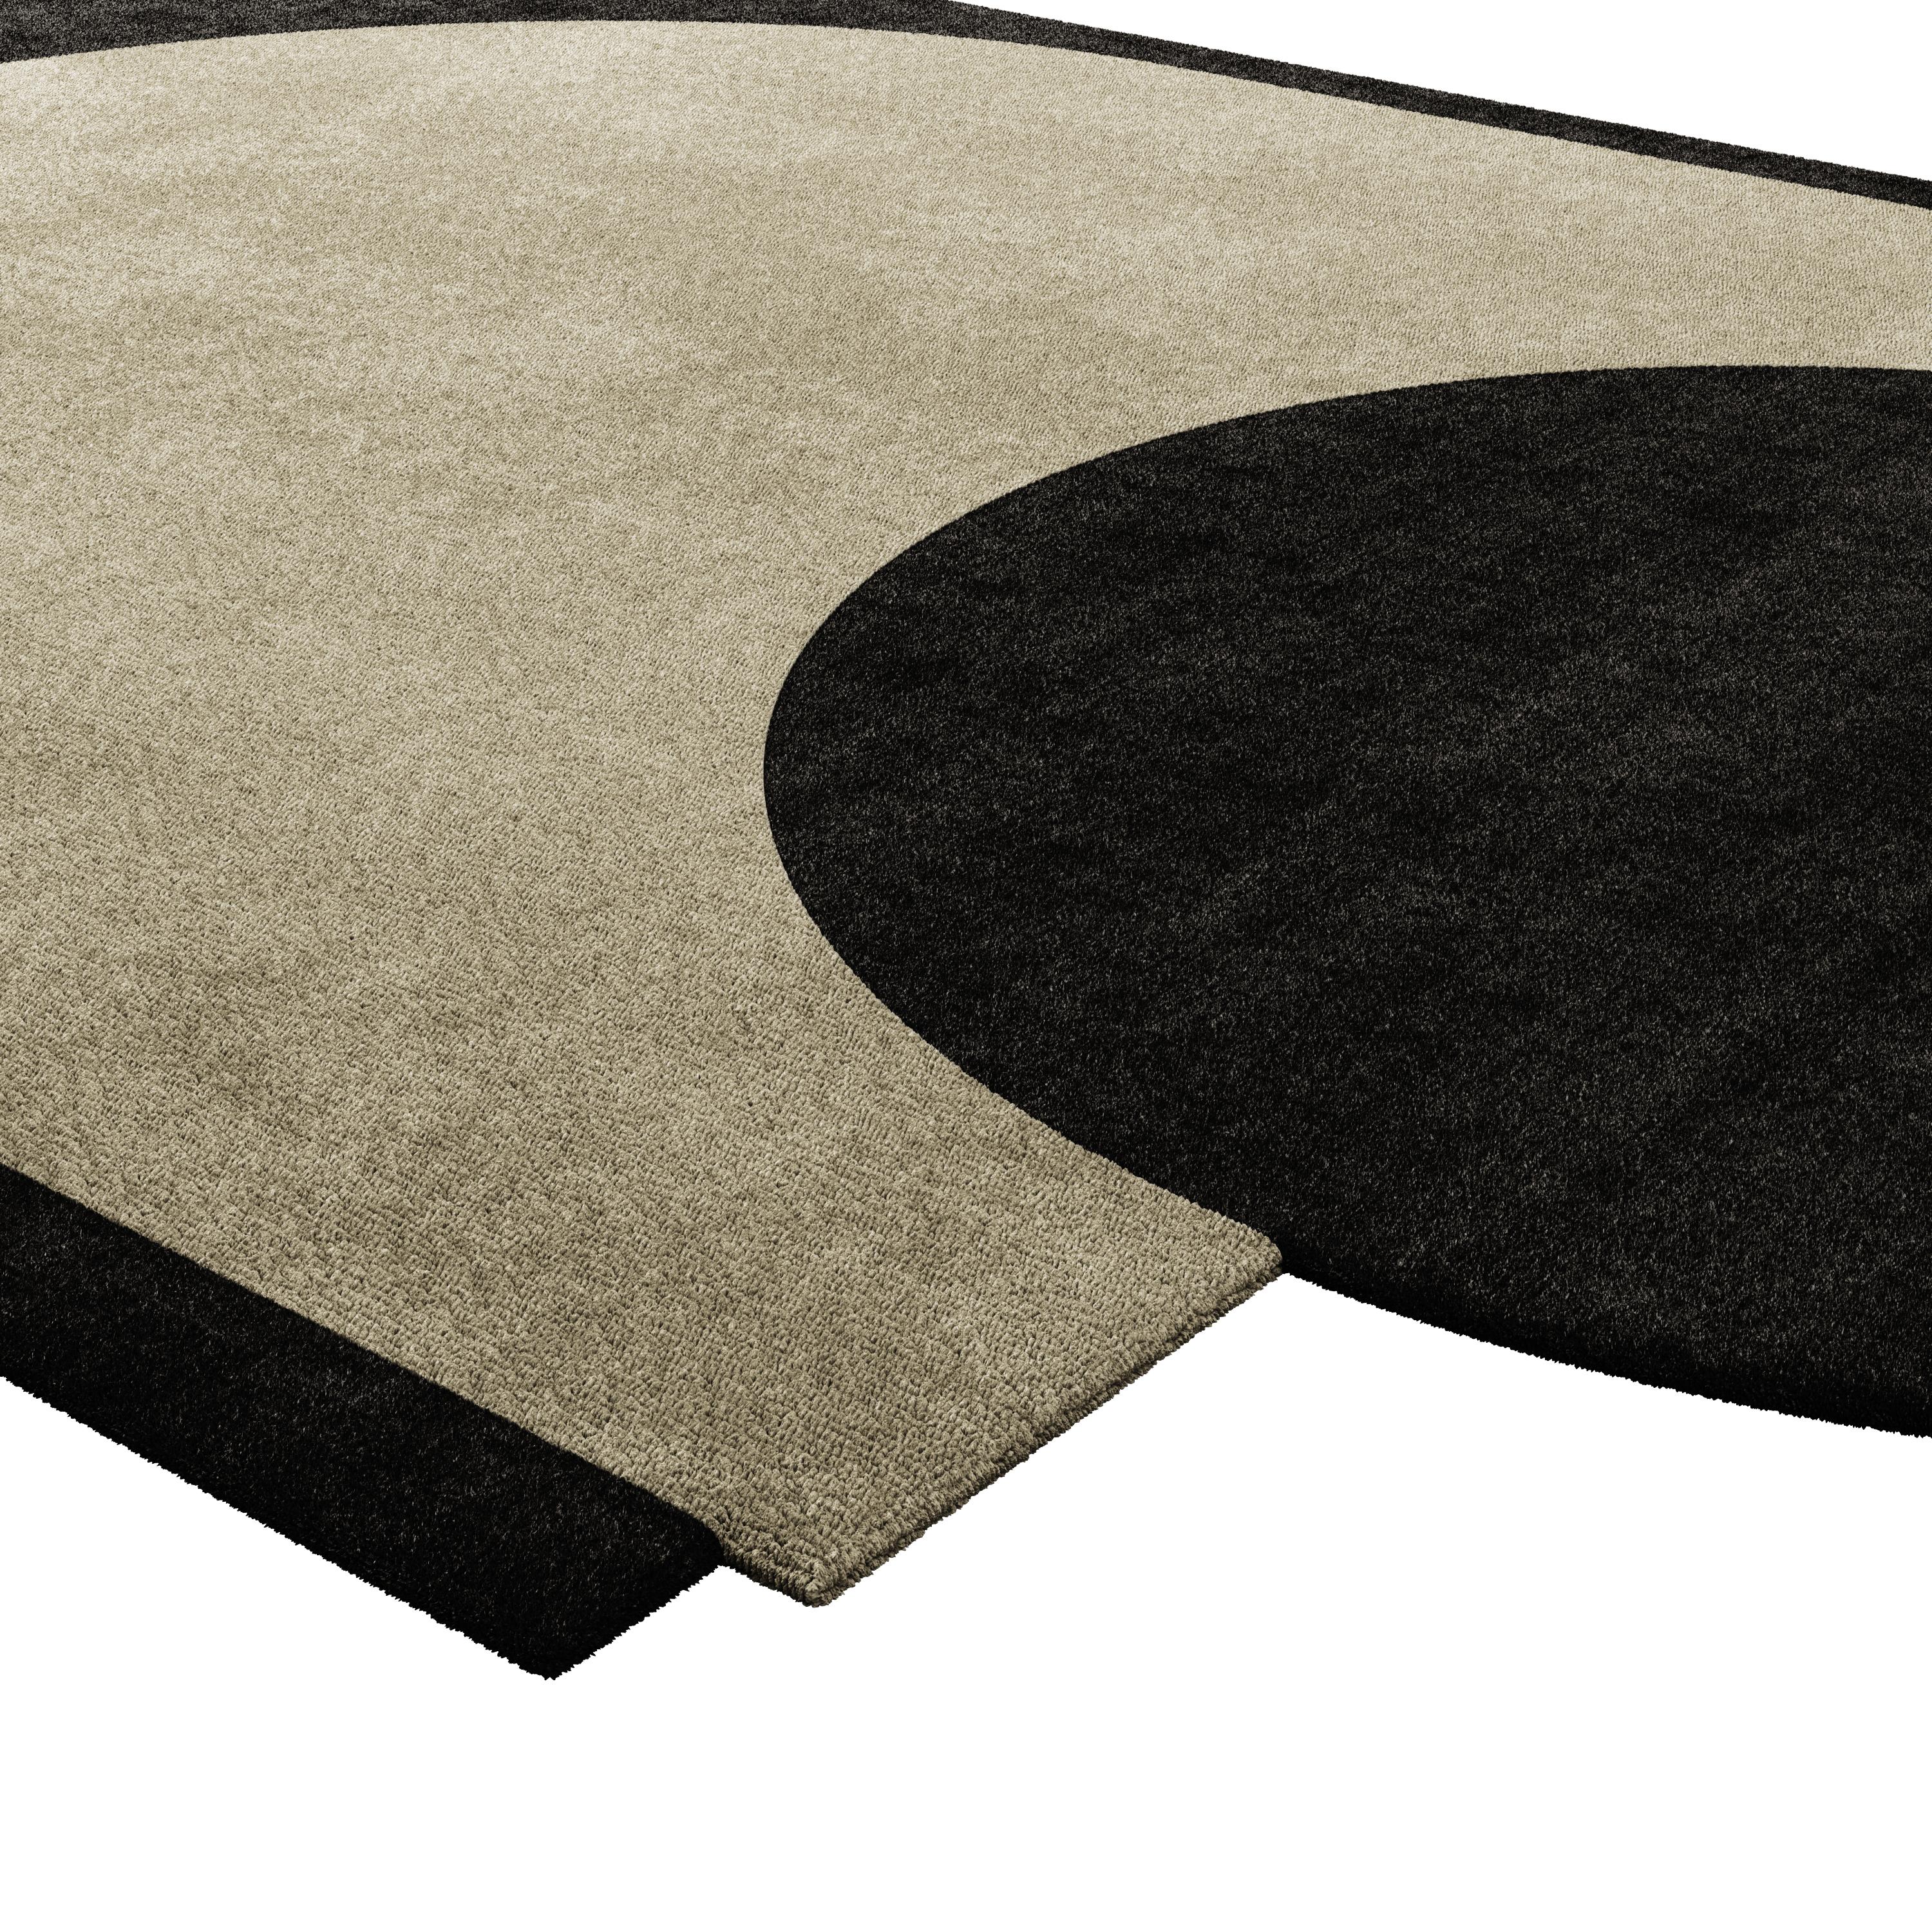 The Lyocell raw material gives the rug a smooth texture and subtle sheen, making it a refined addition to various spaces. Its minimalist aesthetic, combined with the luxurious quality of Lyocell, makes this rug a sophisticated choice for those